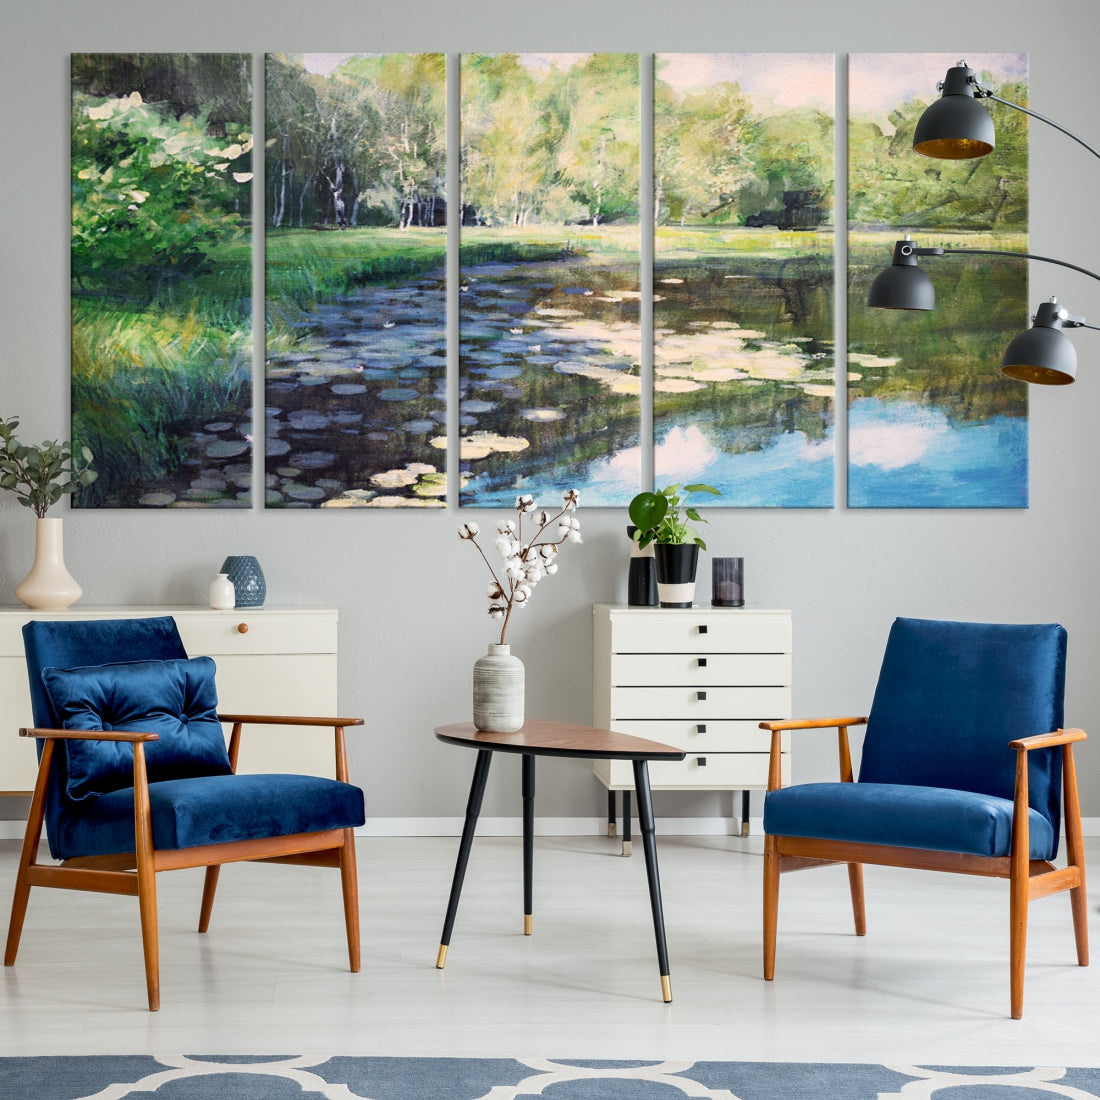 Forest Pond River Lake Extra Large Wall Art Canvas Print